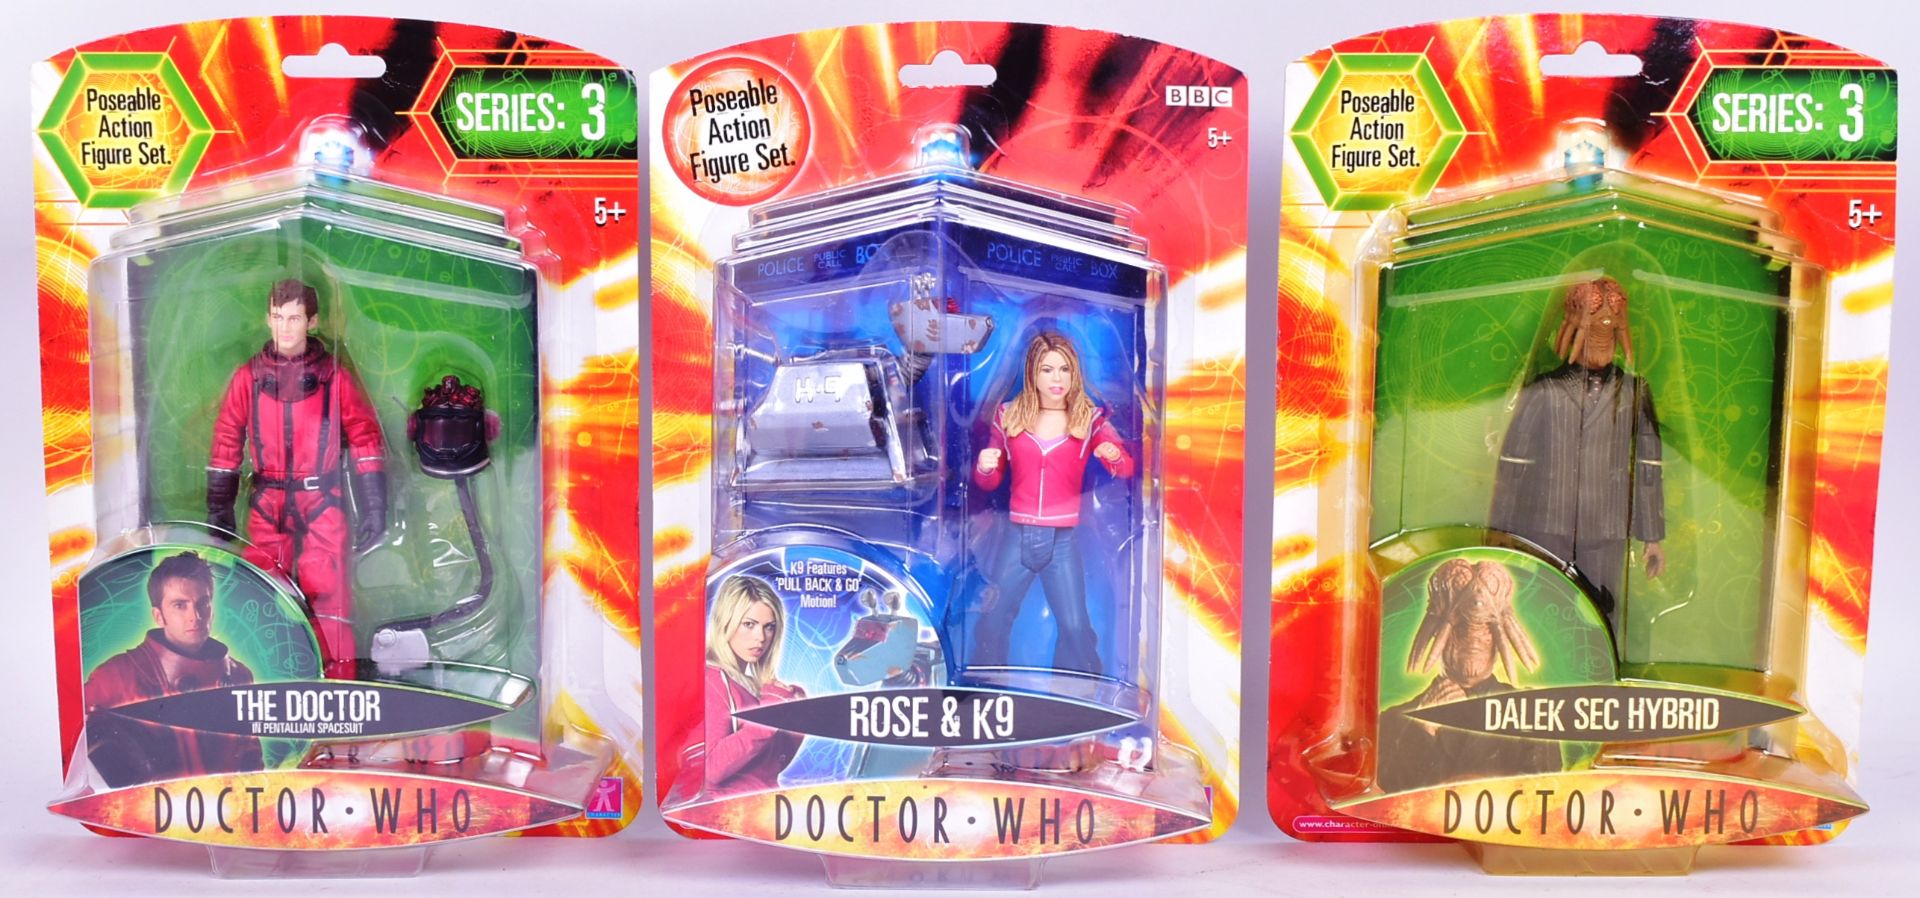 DOCTOR WHO - CHARACTER OPTIONS - CARDED ACTION FIGURES - Image 4 of 4